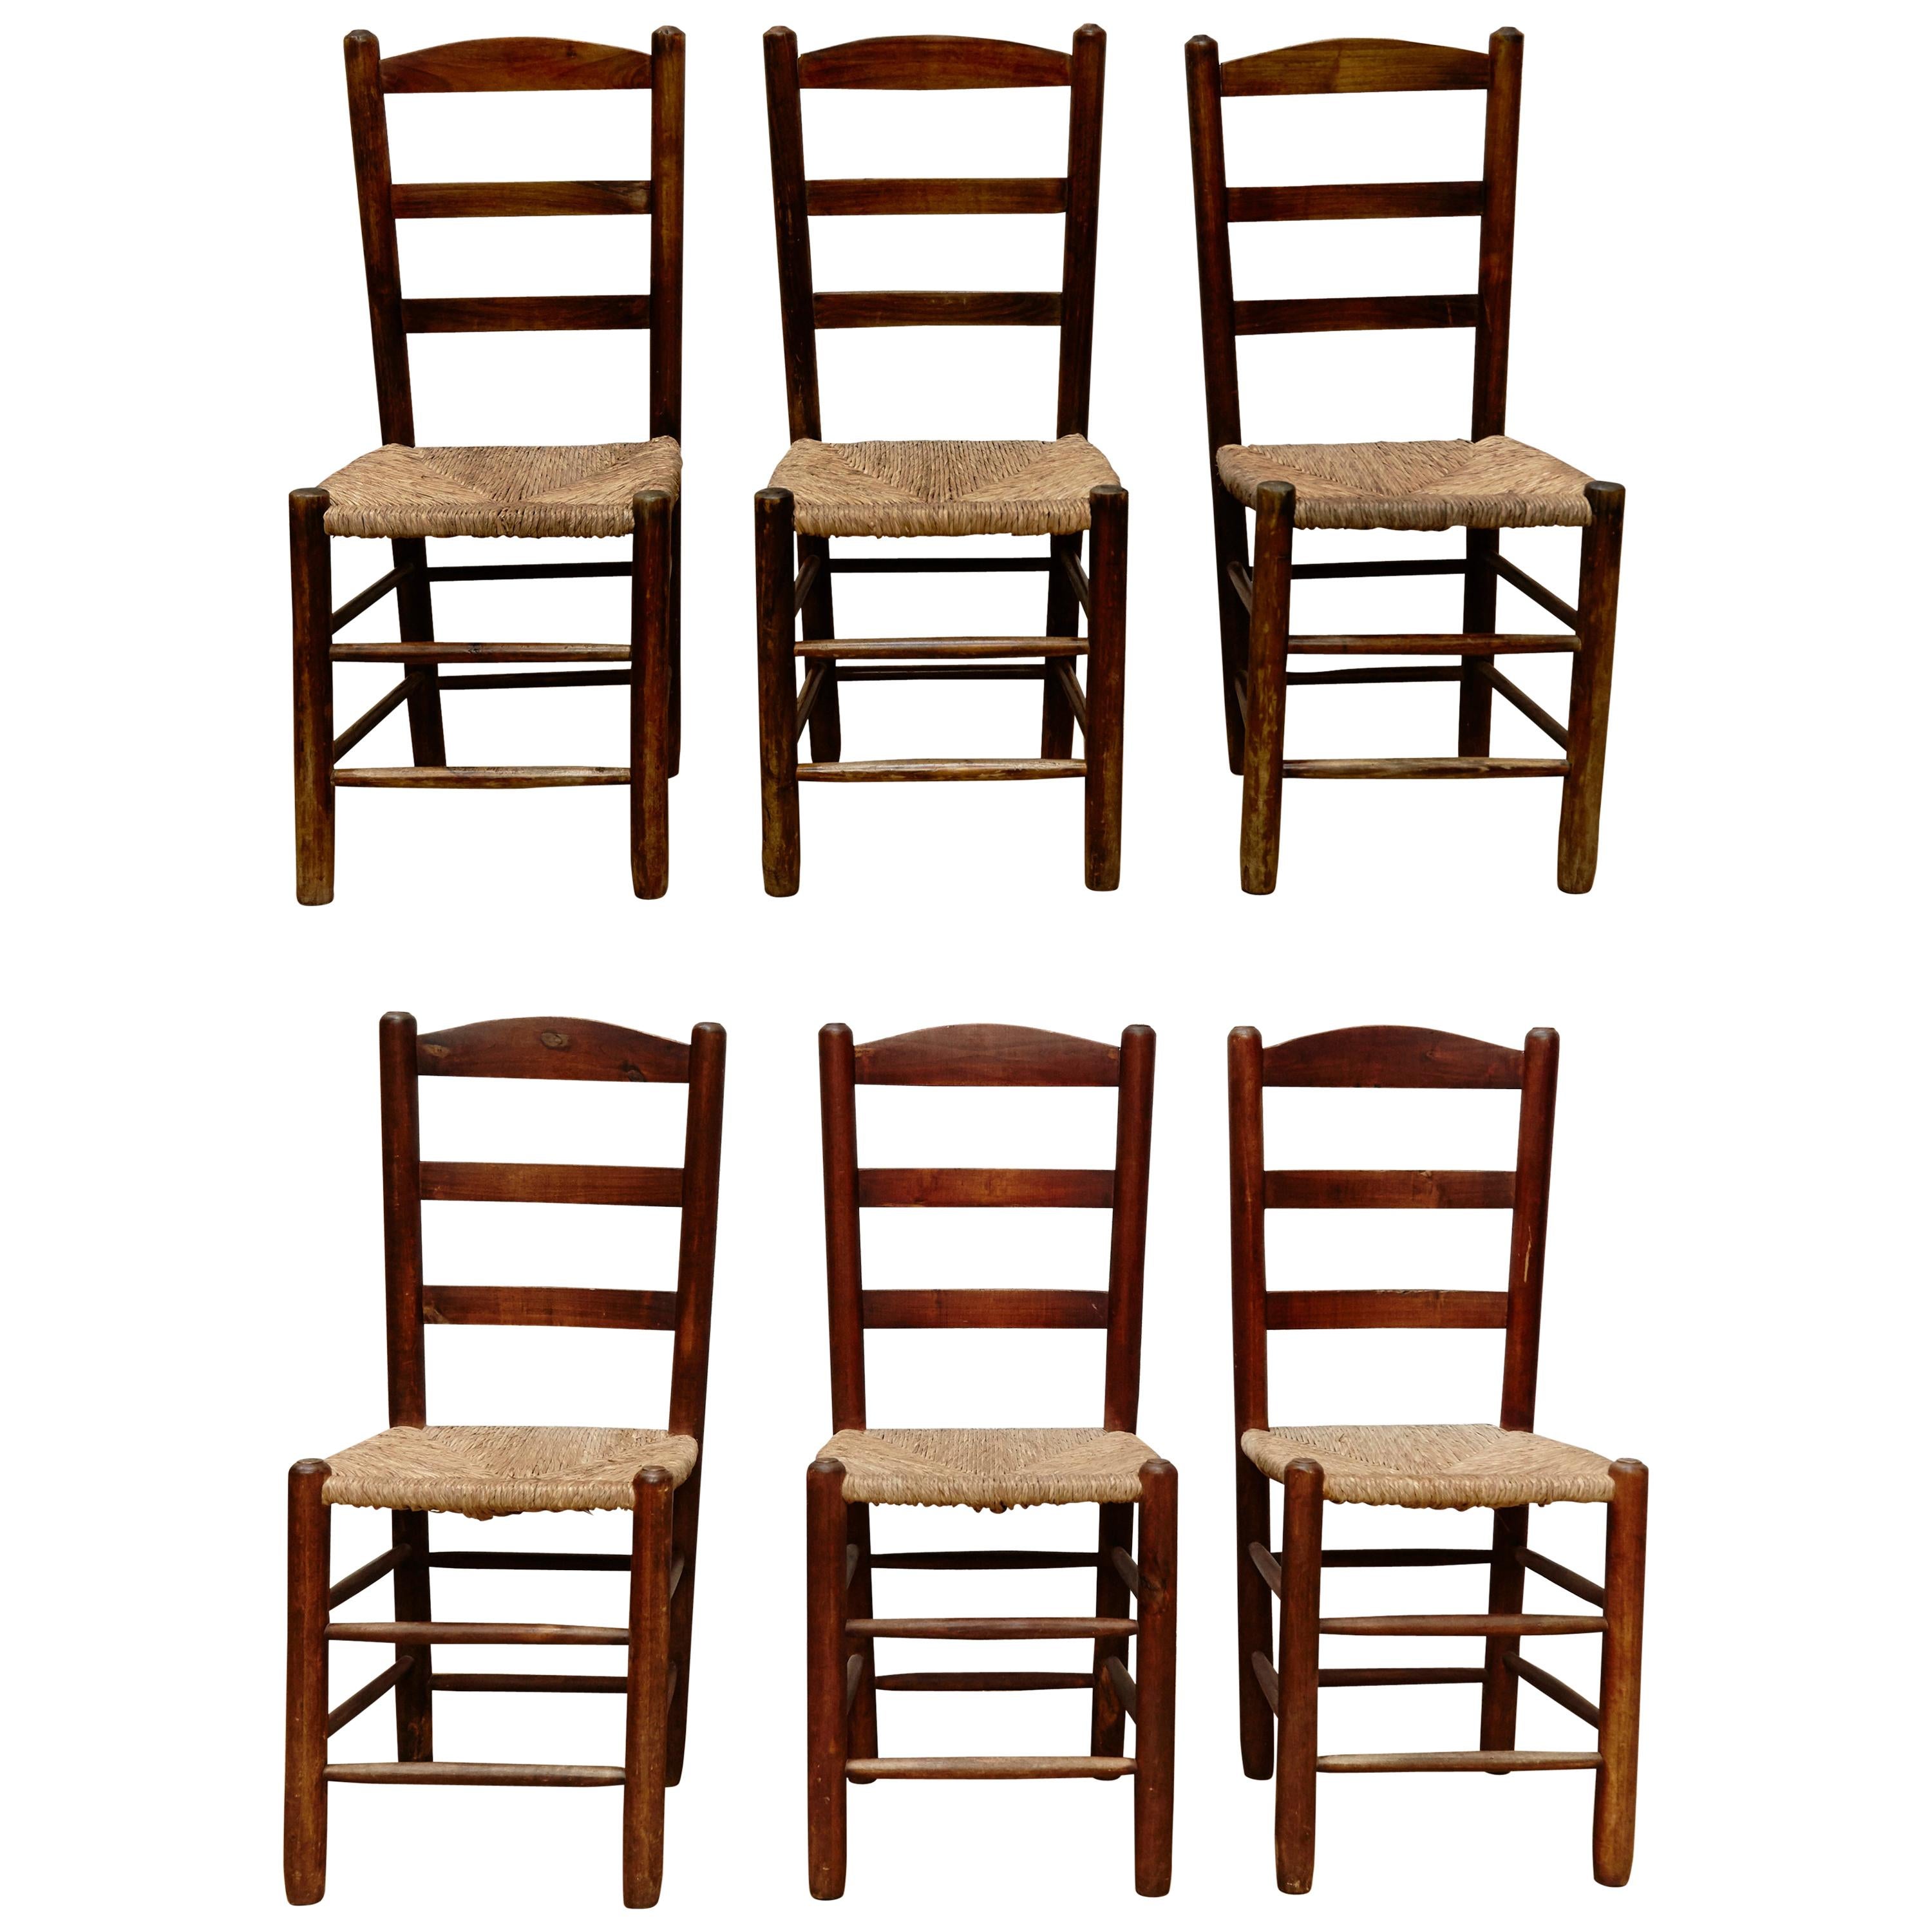 Set of Six Chairs after Charlotte Perriand in Wood and Rattan, circa 1950